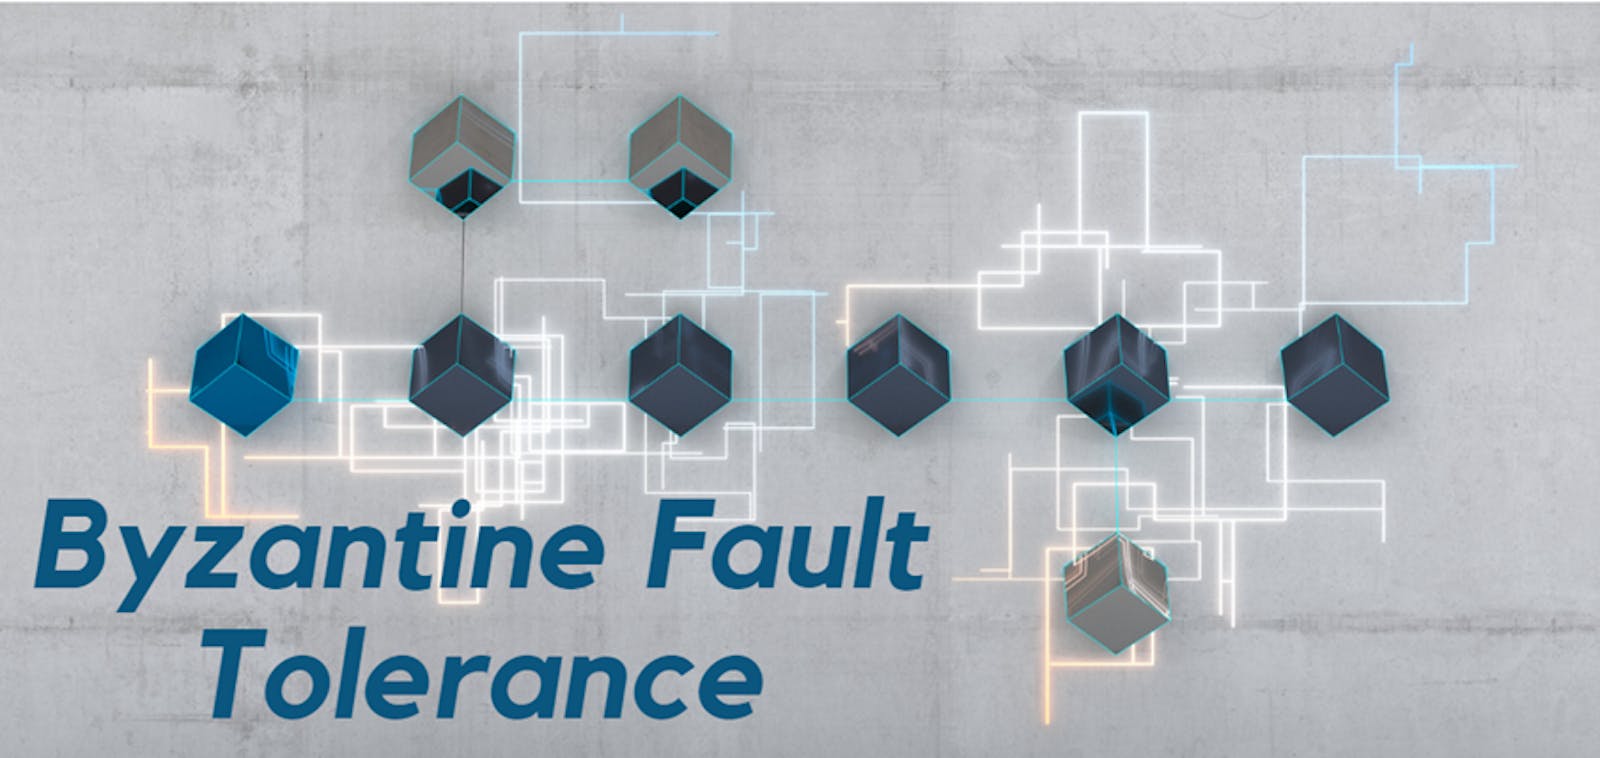 Byzantine Fault Tolerance: The Critical Component of Trust in Blockchain